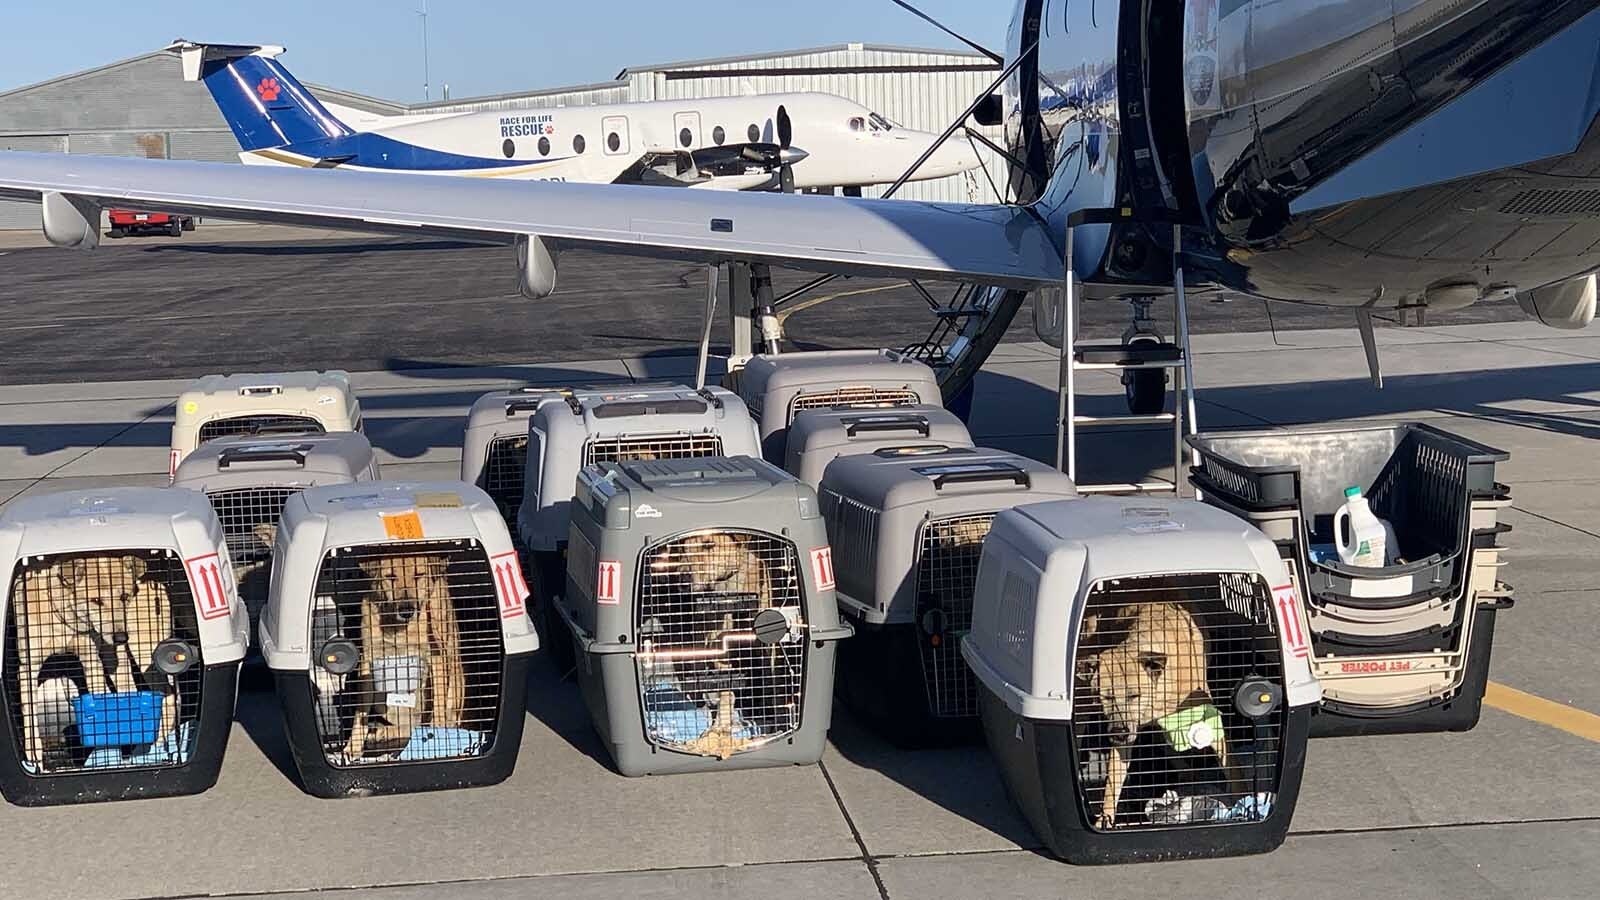 The 10 refugee dogs of all breeds wait on the Tarmac at JFK Airport in New York to board a private charter plane to Wyoming last Sunday.